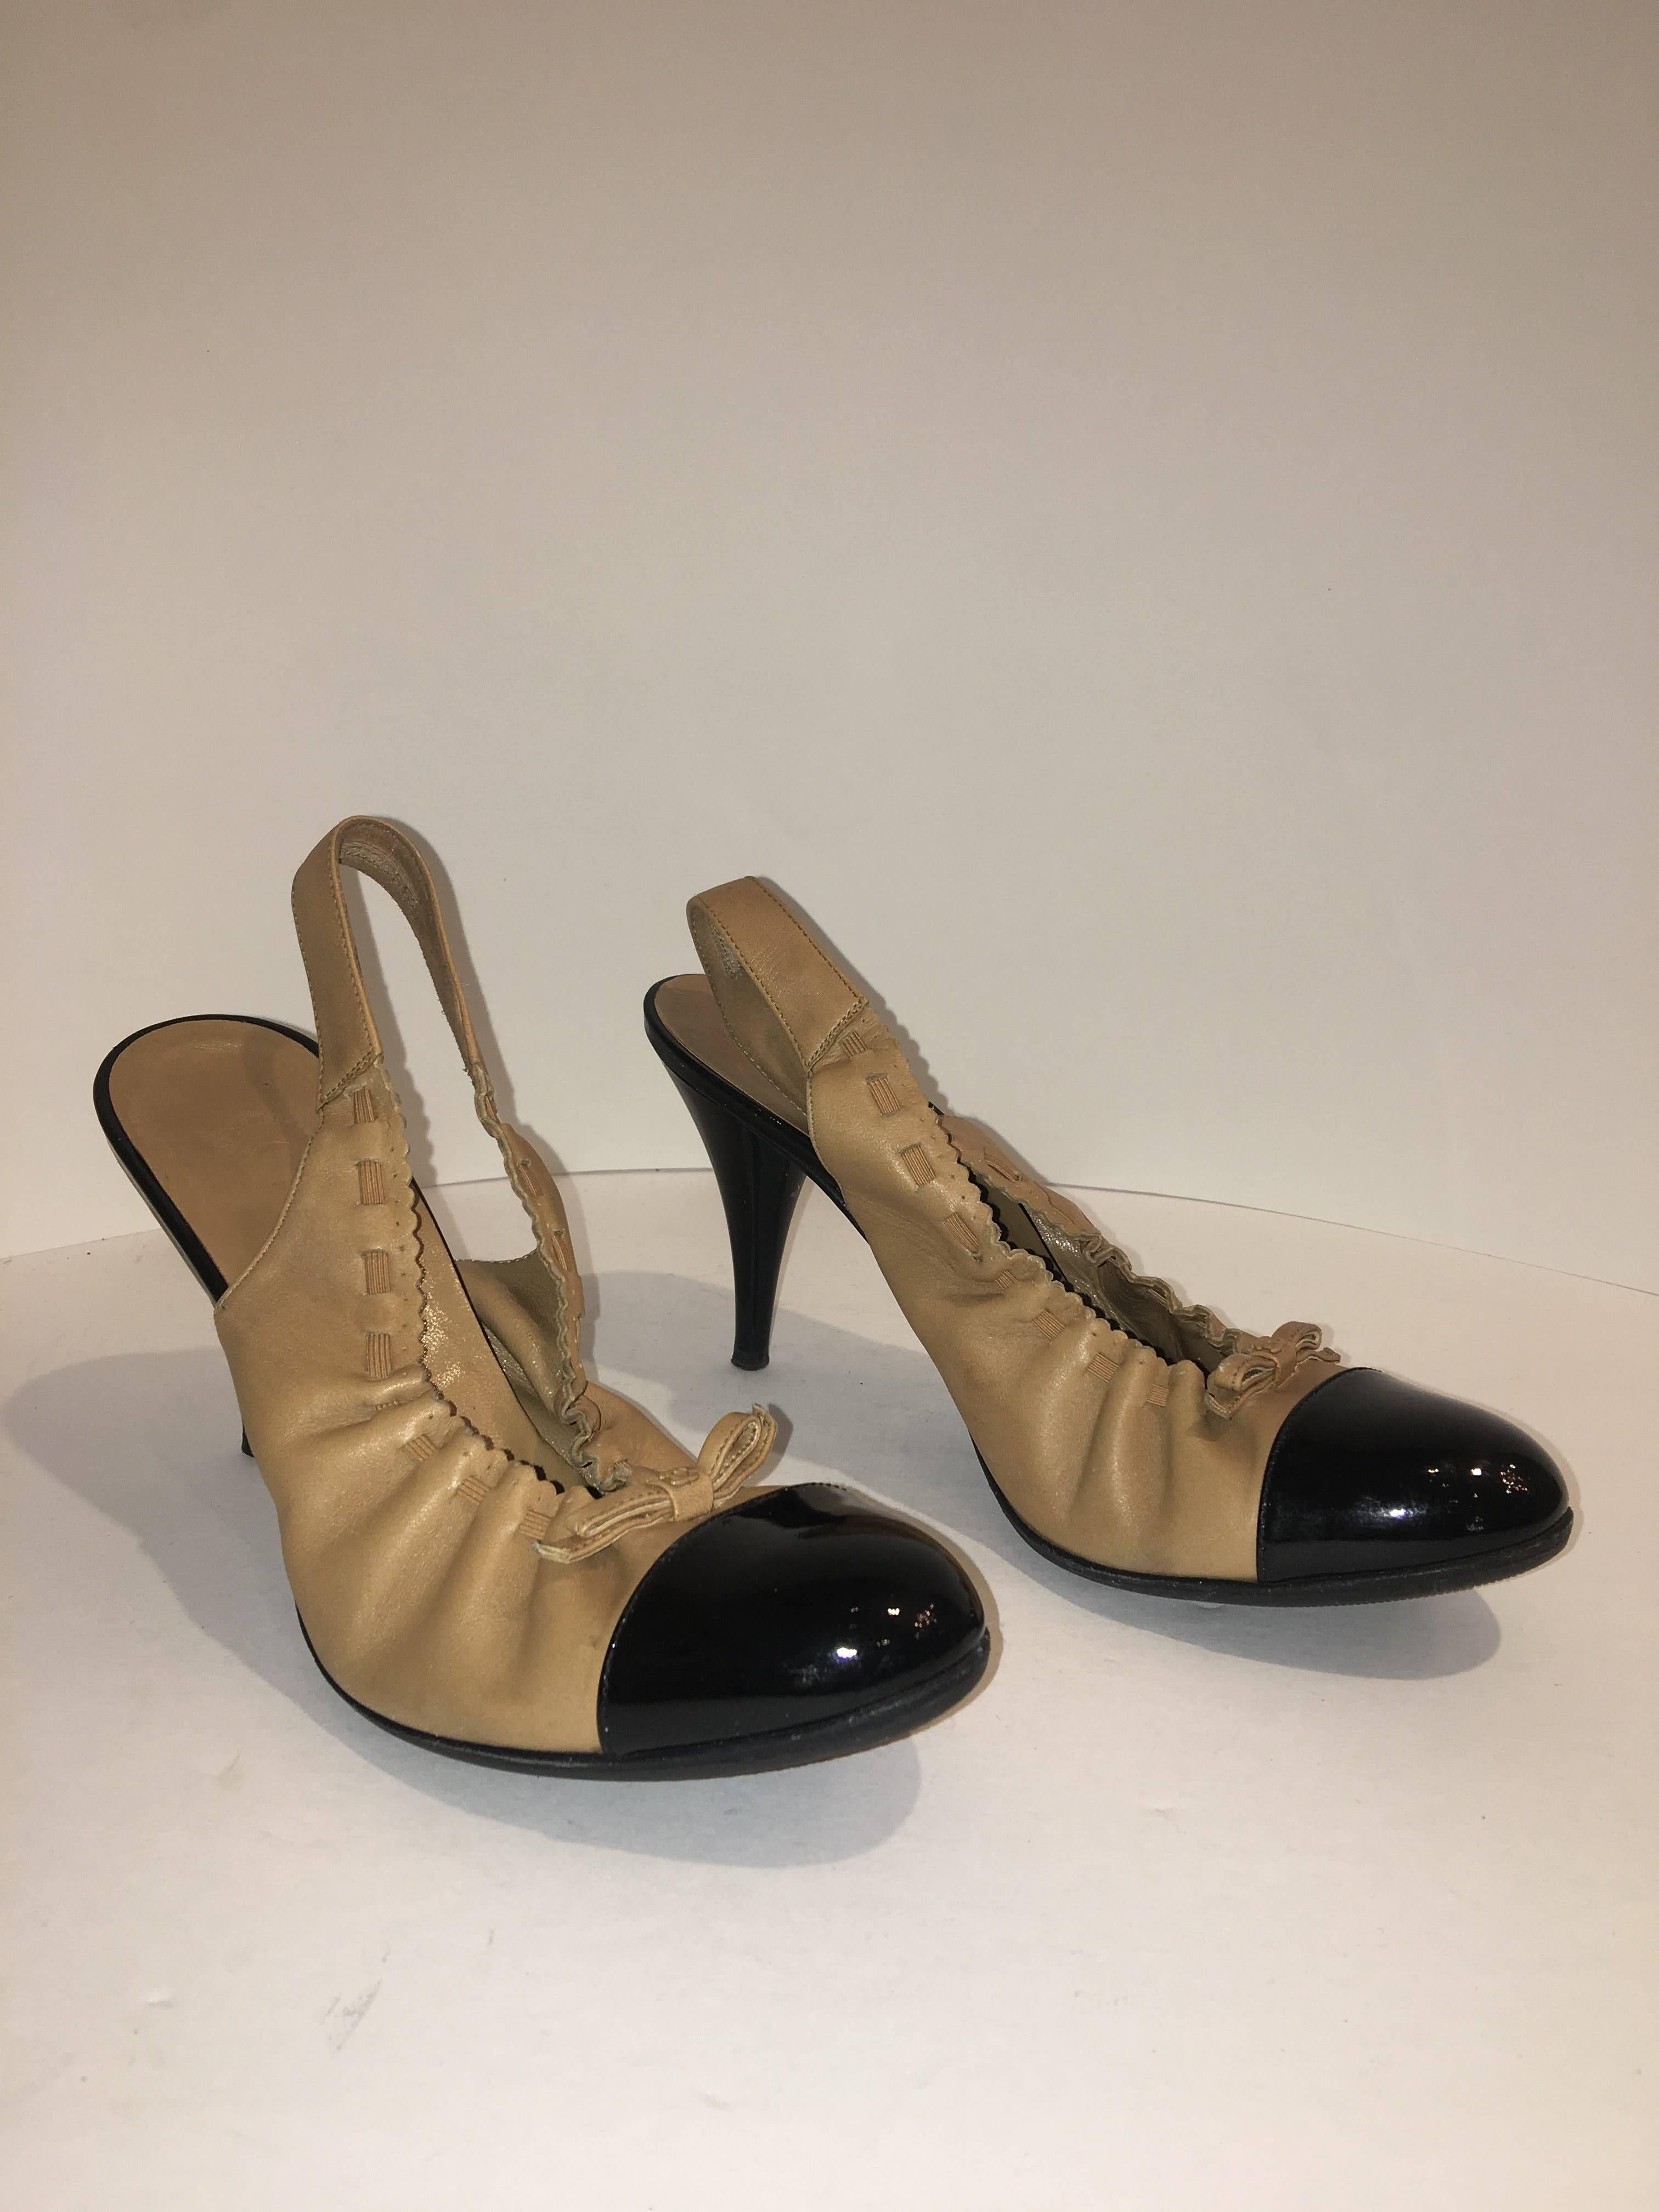 Chanel Elastic Patent Leather Two TonedSling Backs. Black/Tan in size 38.5.